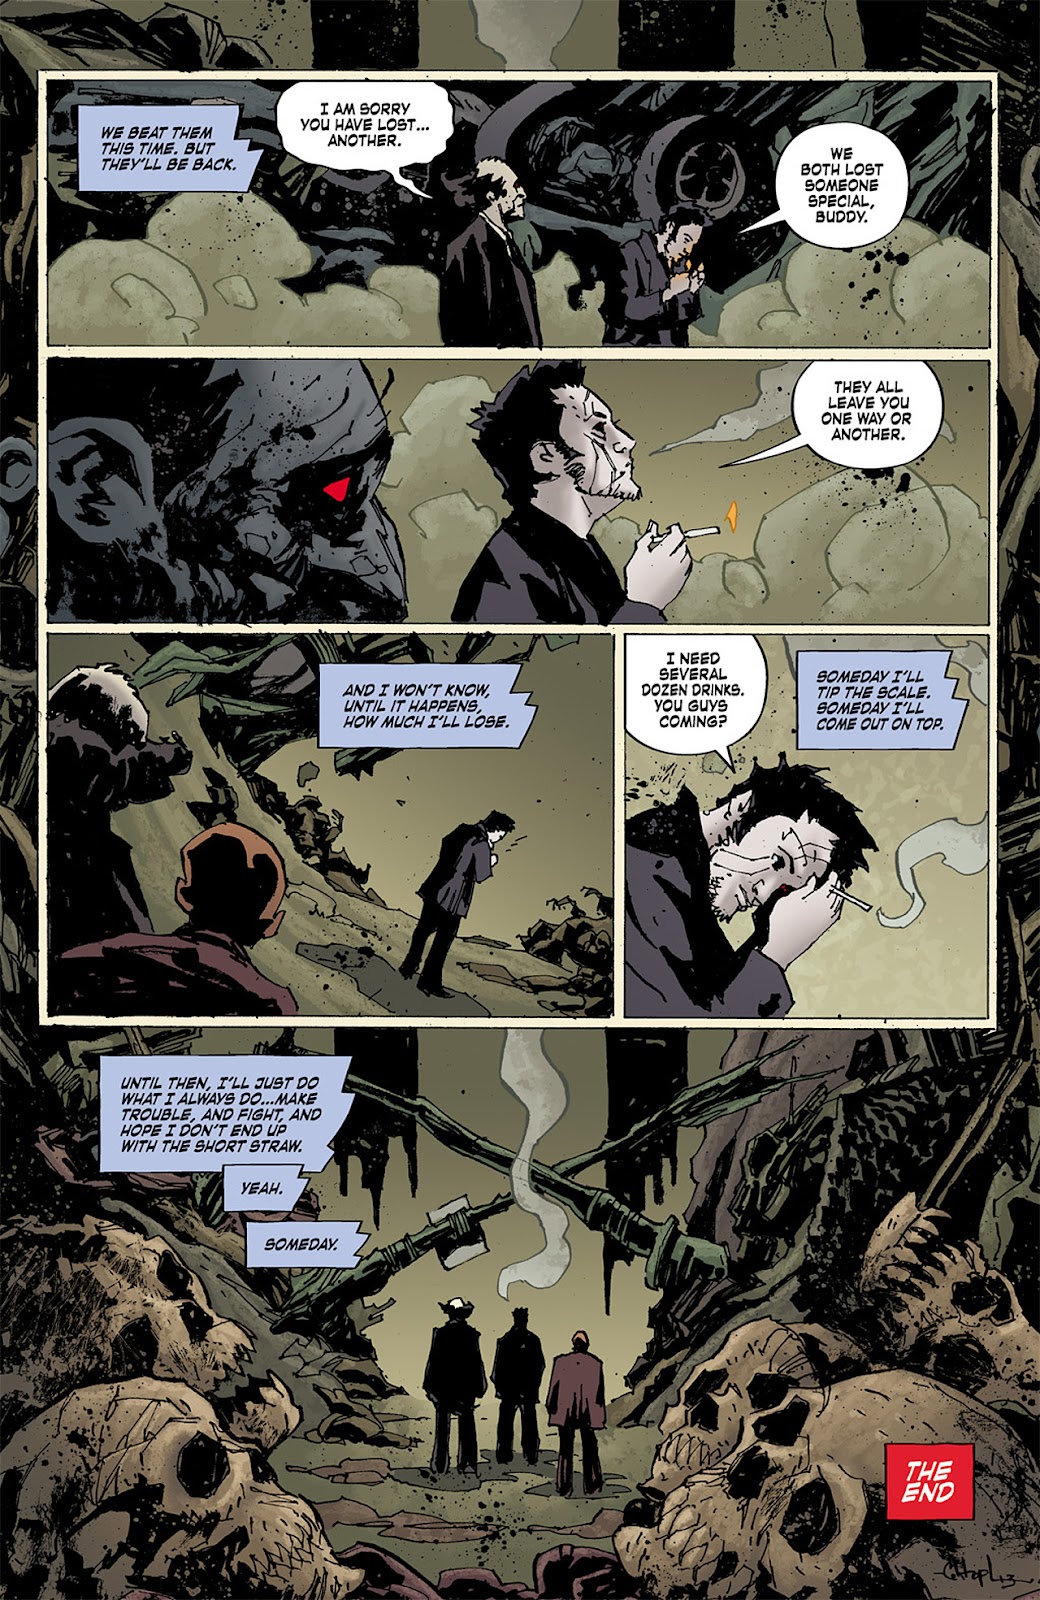 Criminal Macabre: Final Night - The 30 Days of Night Crossover issue 4 - Page 26